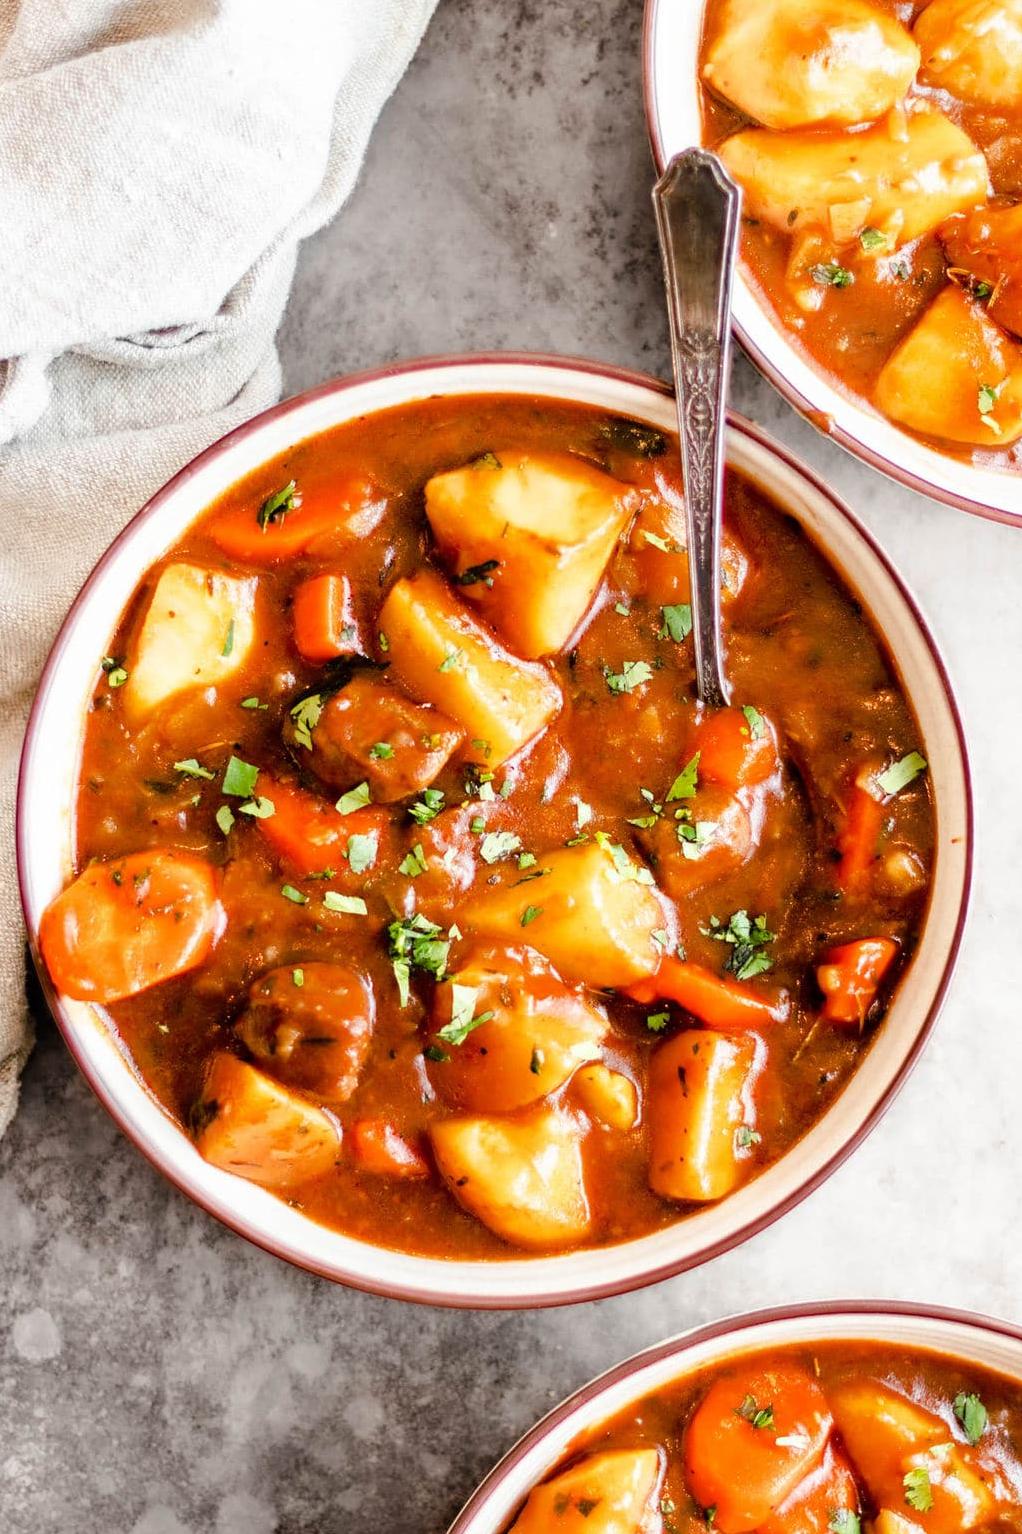  You will be amazed at how easy it is to make this Vegan Irish Stew at home!